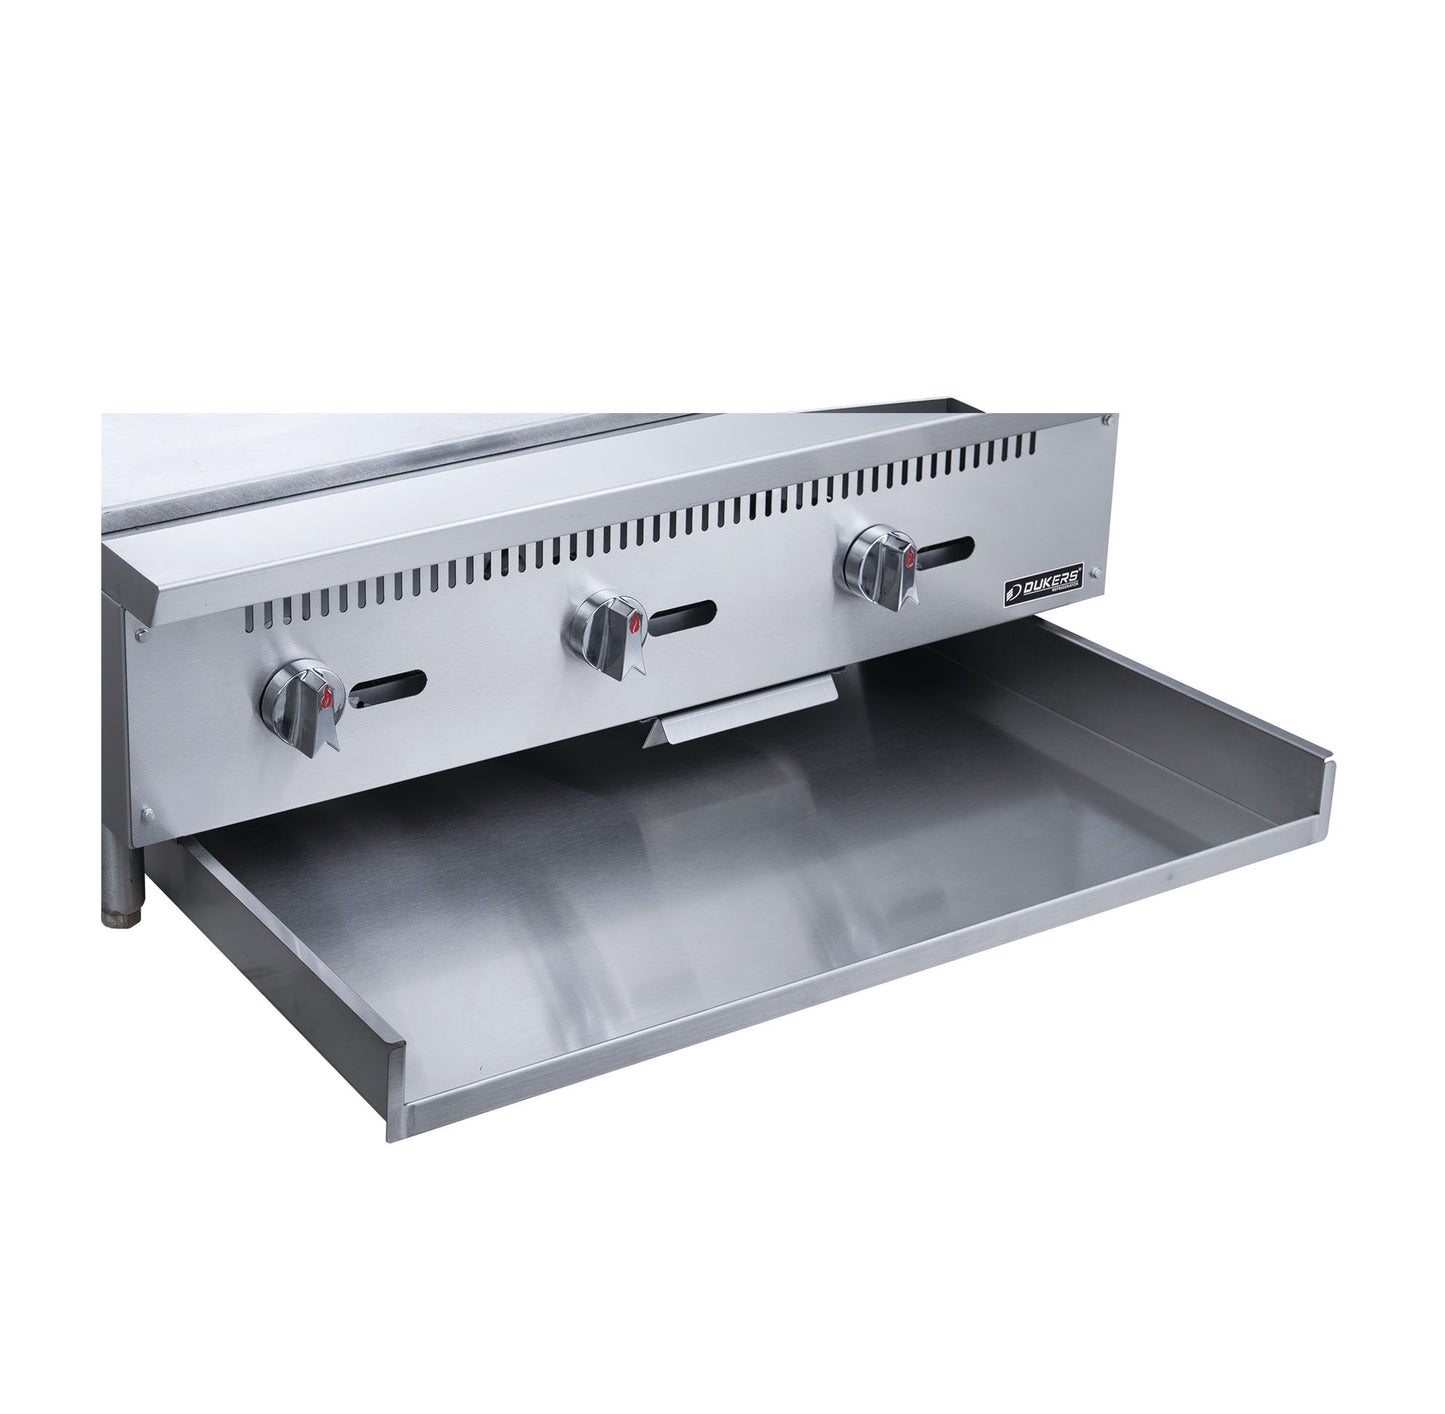 Dukers - DCGM36, Commercial 36" Griddle with 3/4"" Griddle Polished Plate and 3 Burners Natural Gas / Propane